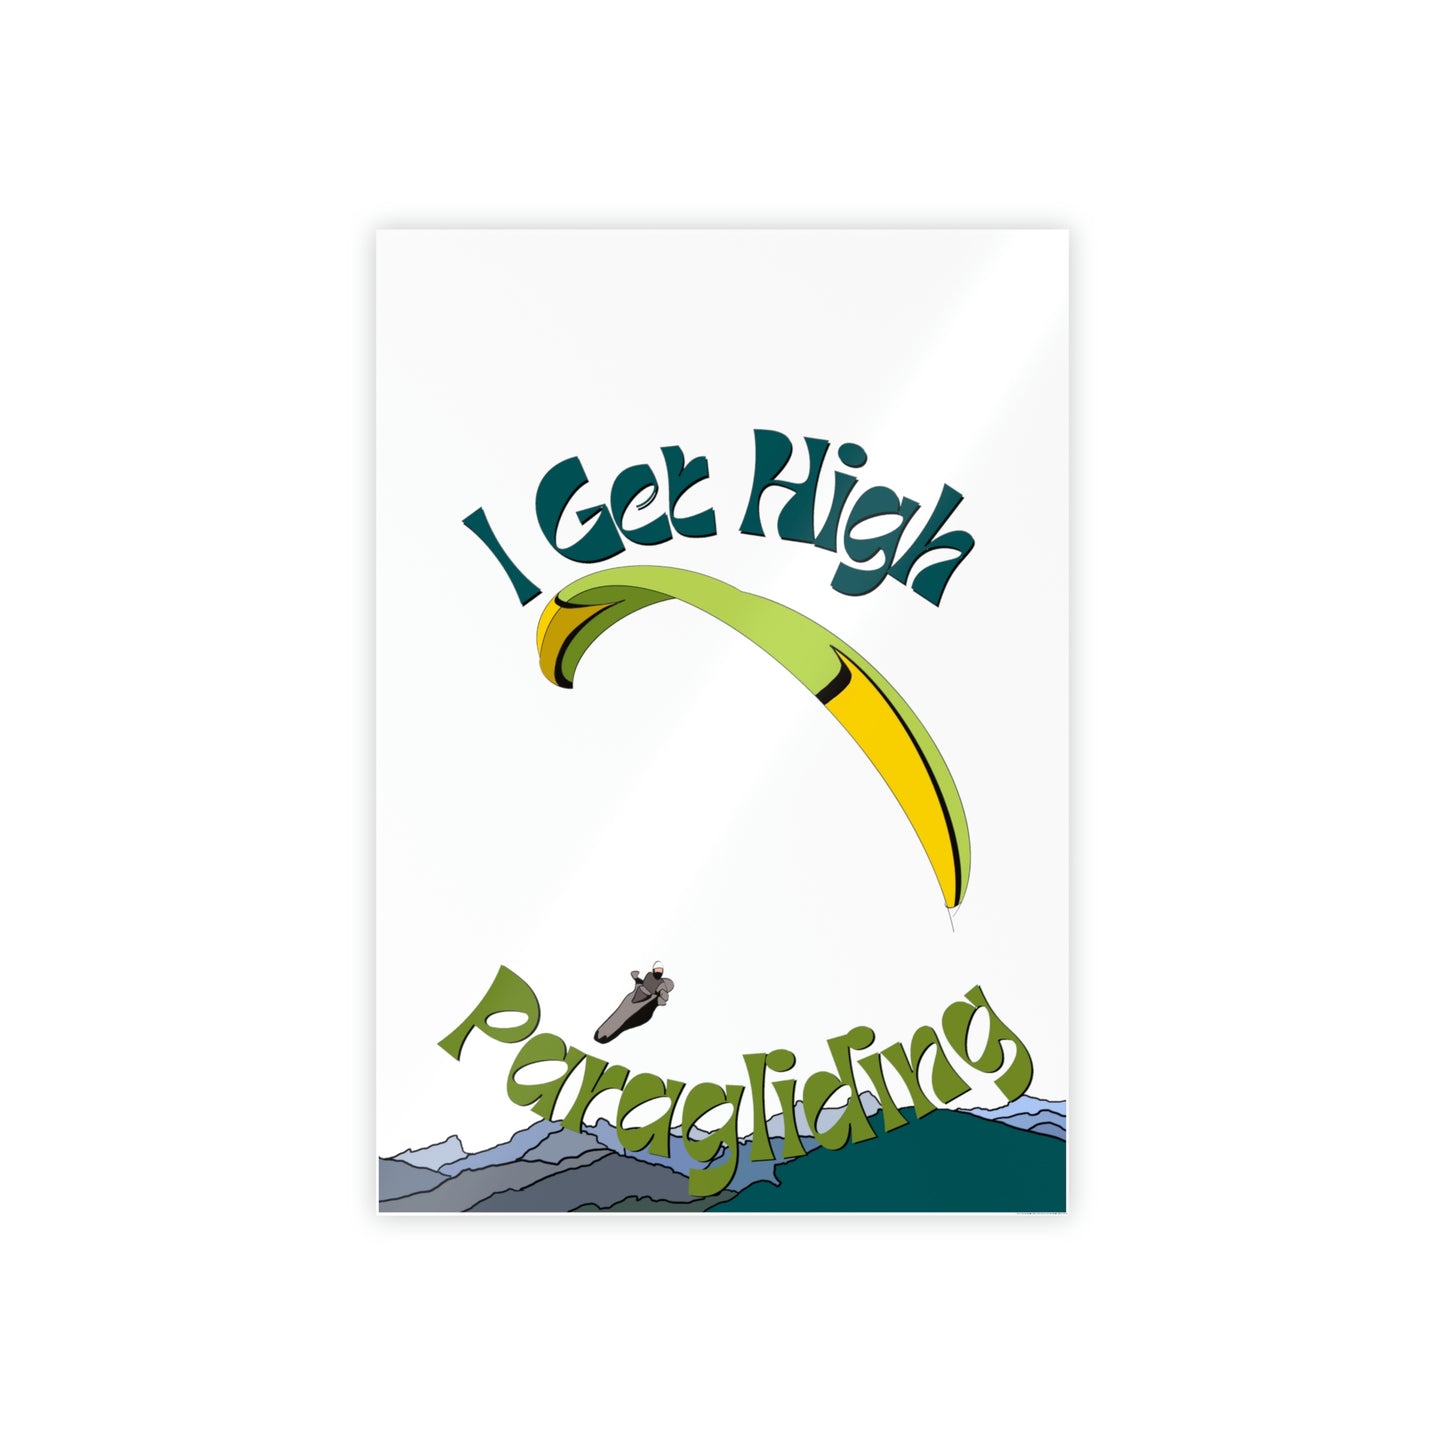 Get High Paragliding - Gloss Posters